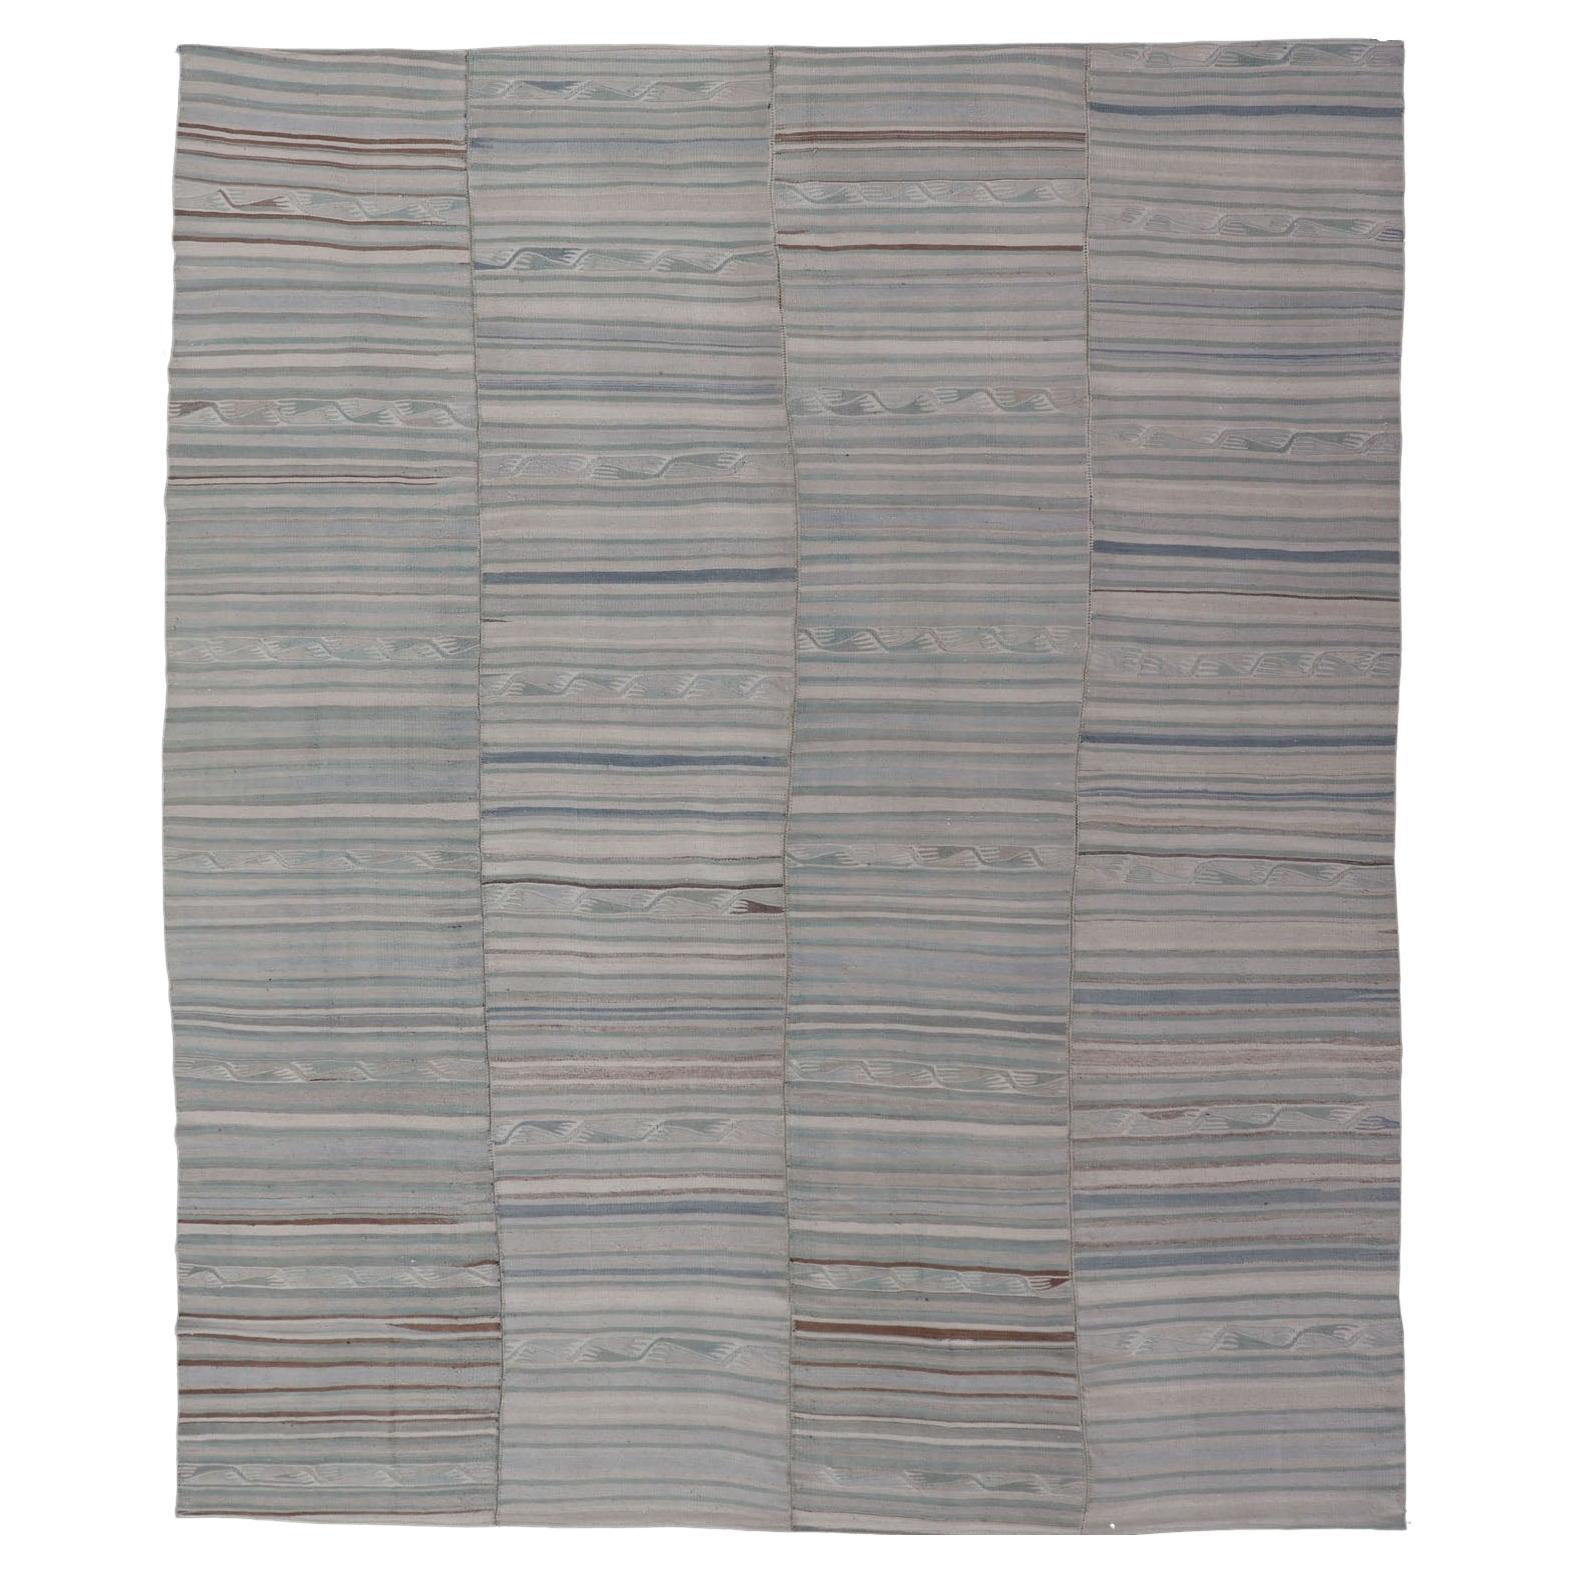 Vintage Turkish Paneled Flat-Weave Kilim in Muted Colors With Stripe Design 